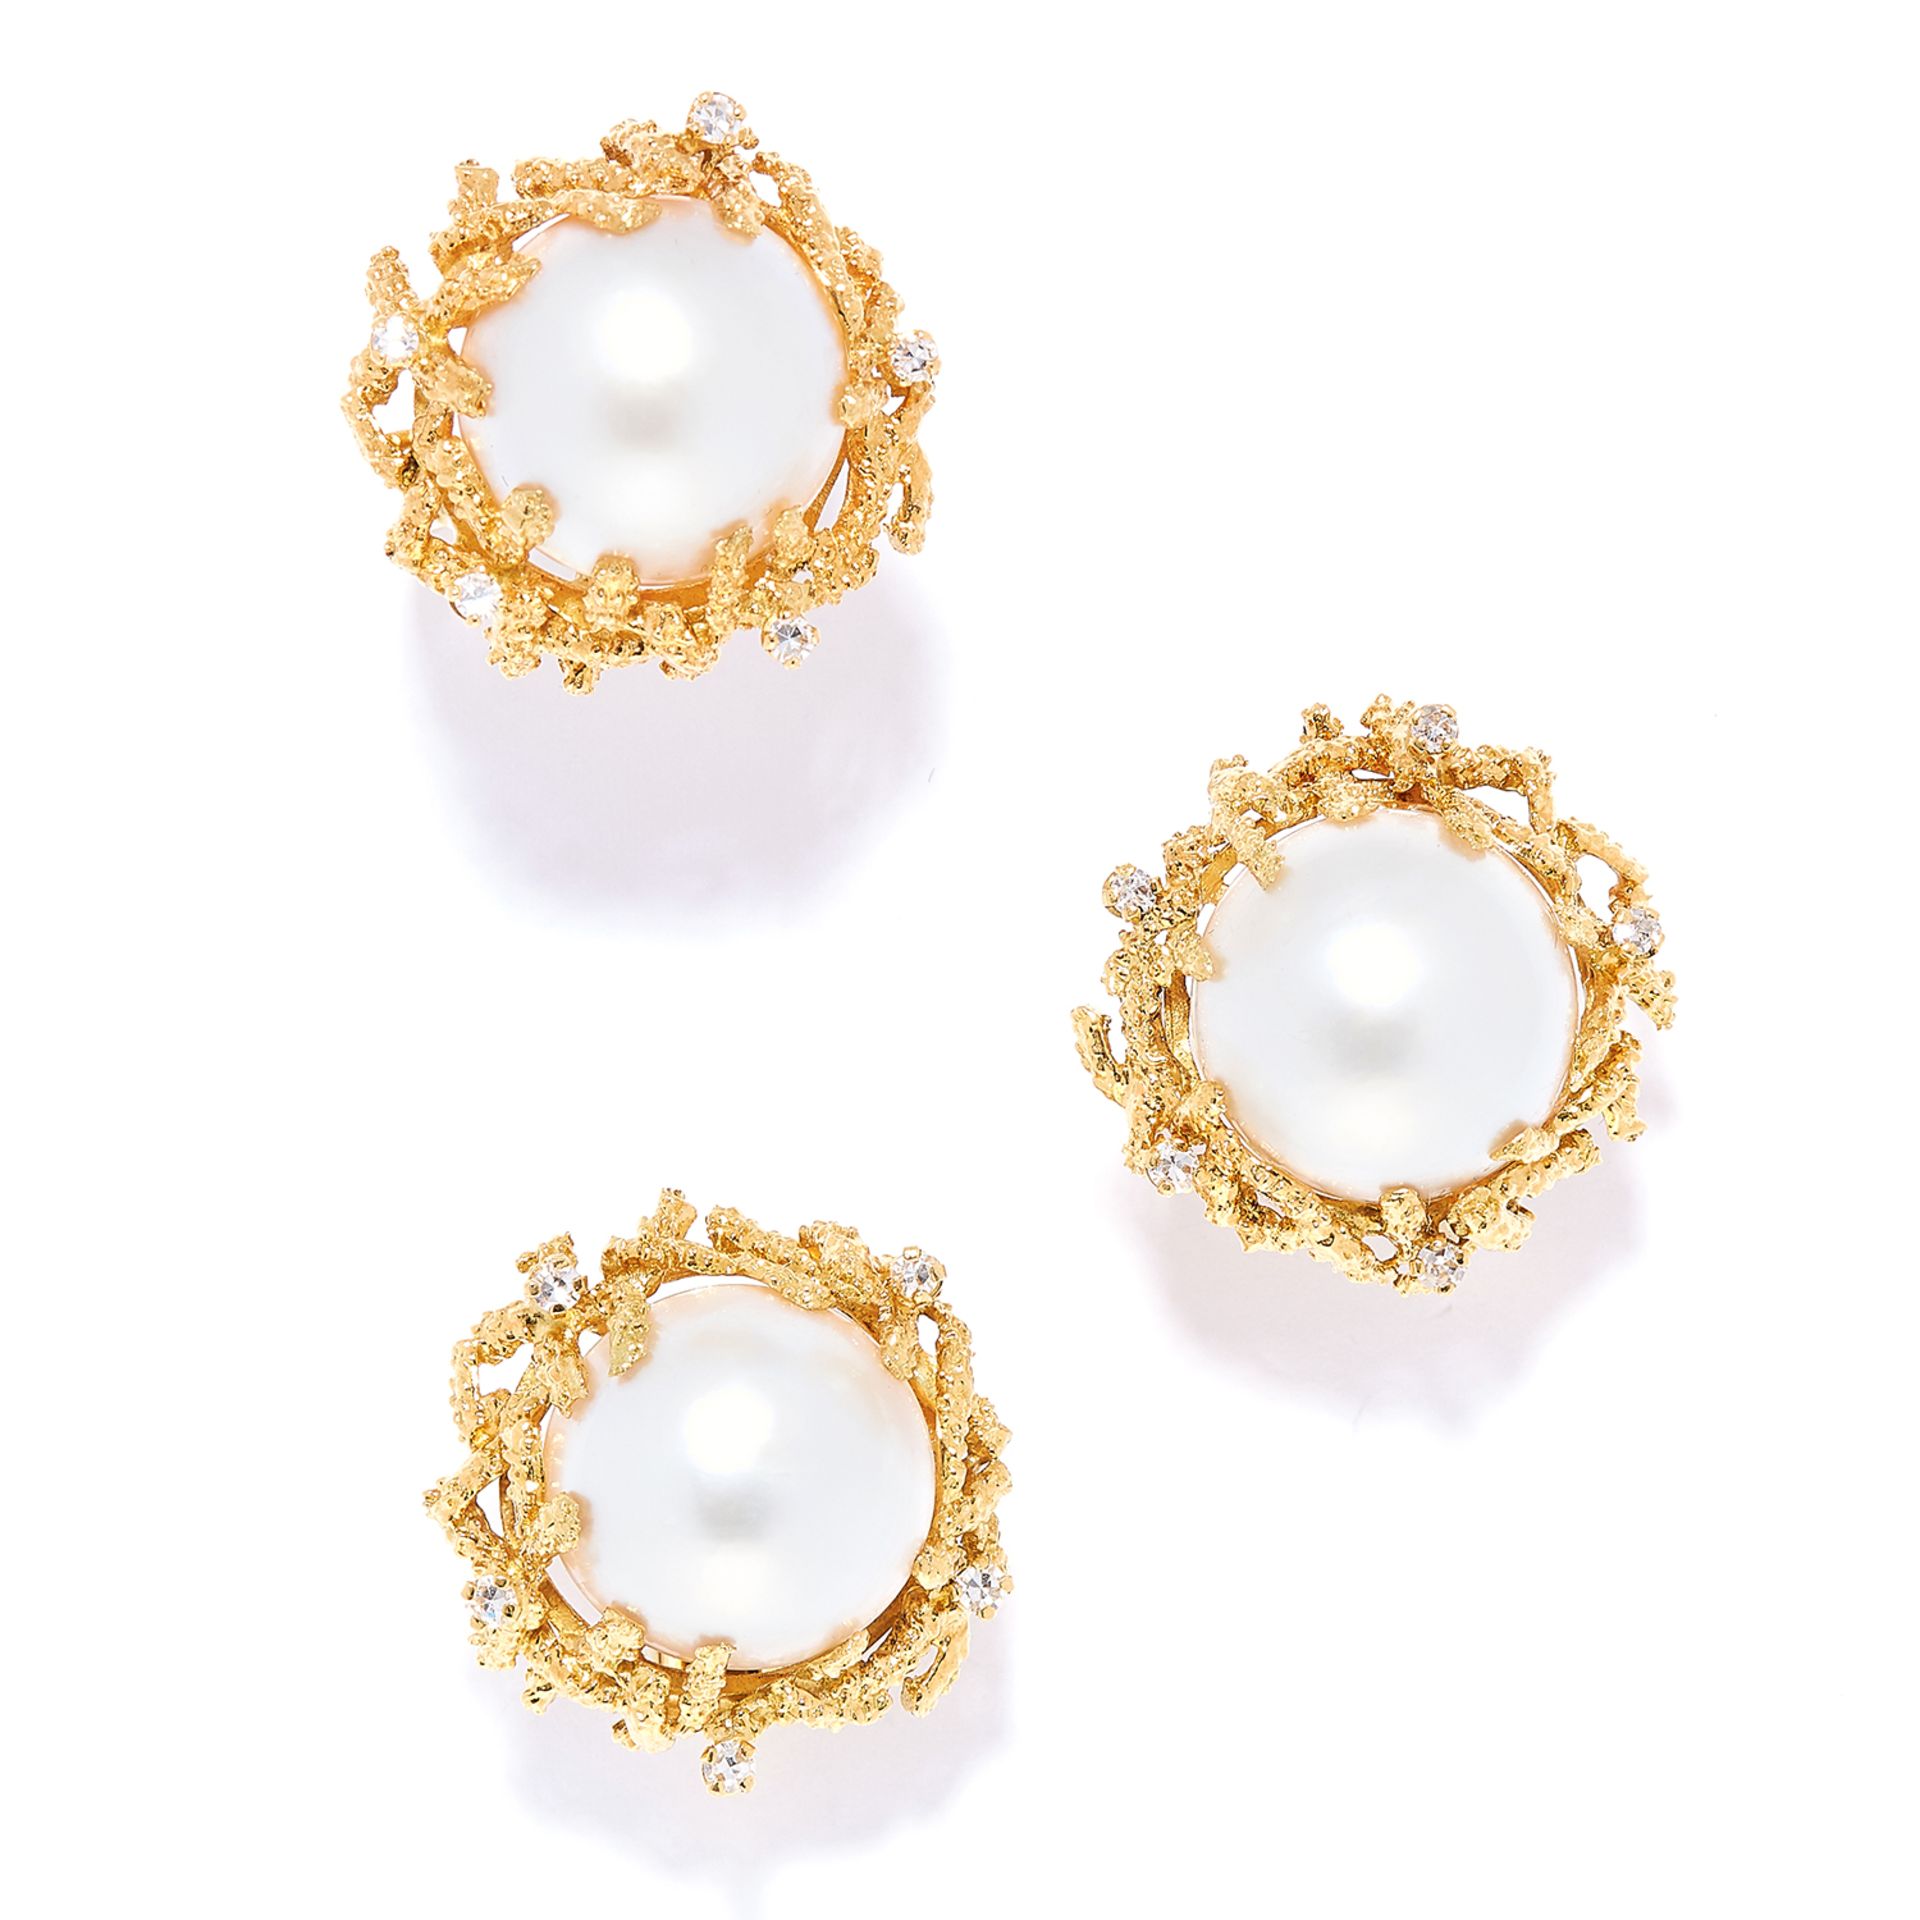 PEARL AND DIAMOND RING AND EARRINGS SUITE, BEN ROSENFELD, CIRCA 1976-77 each comprising of a mabe